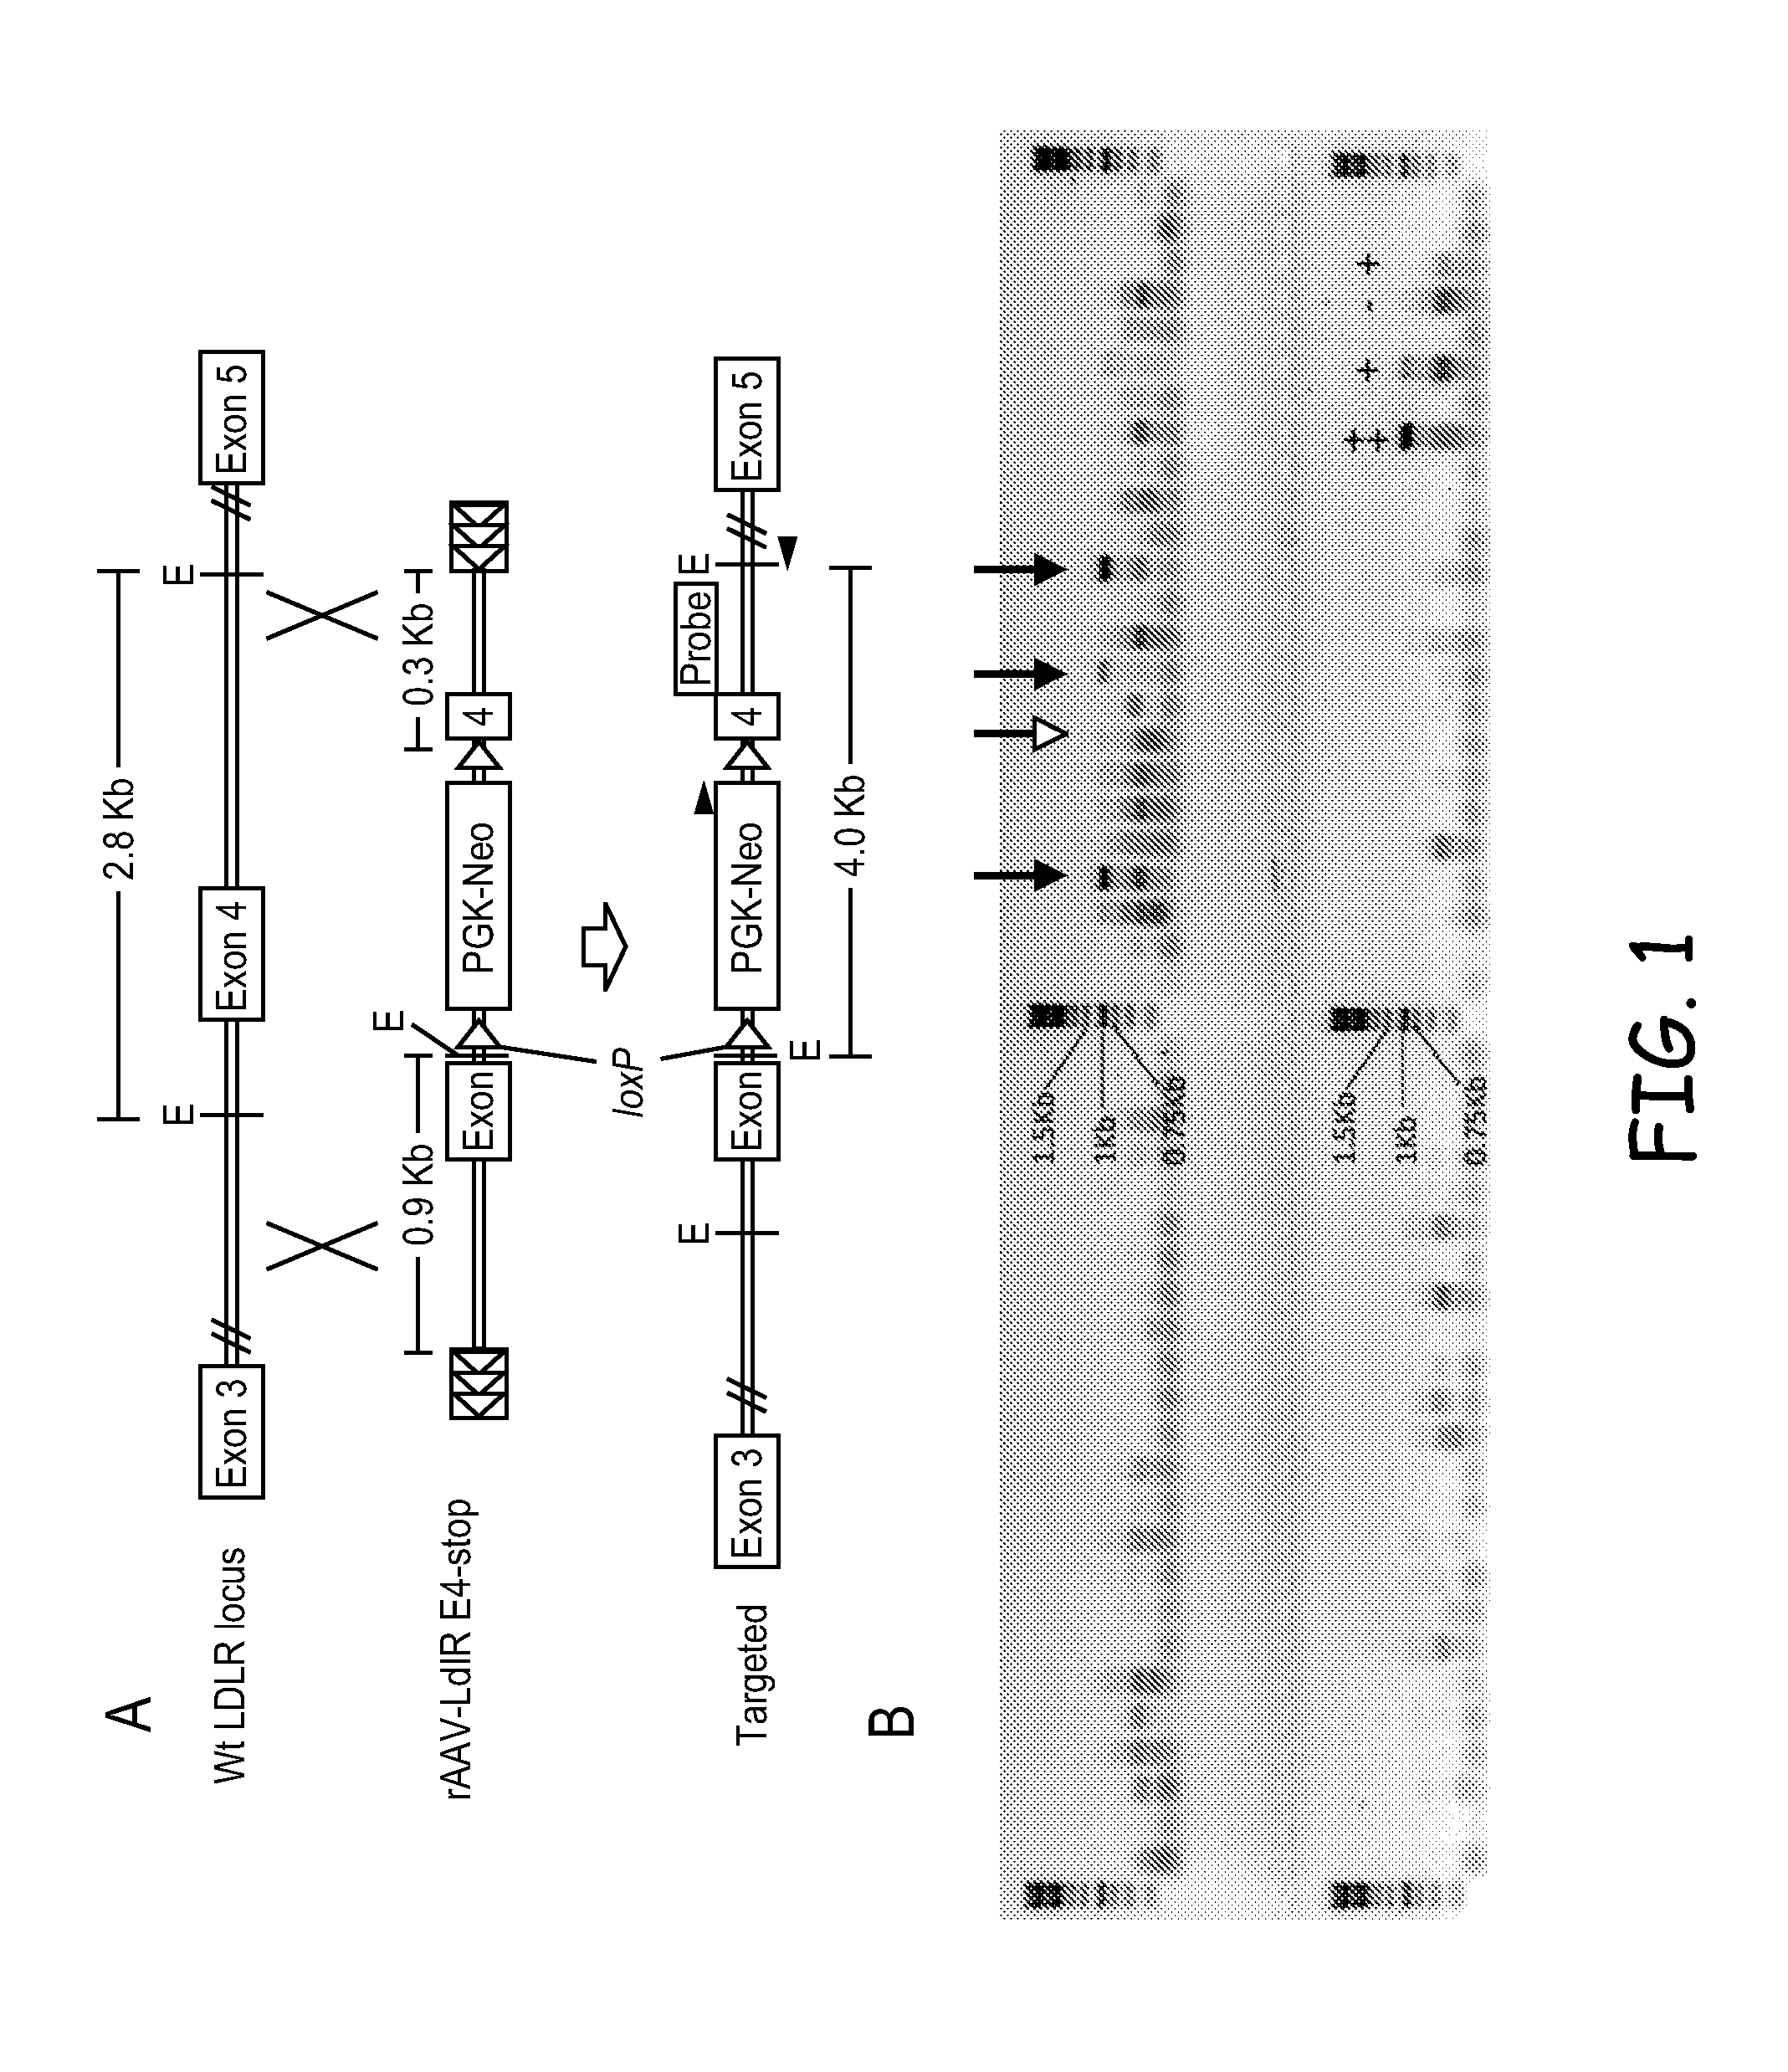 Methods and materials for producing transgenic artiodactyls